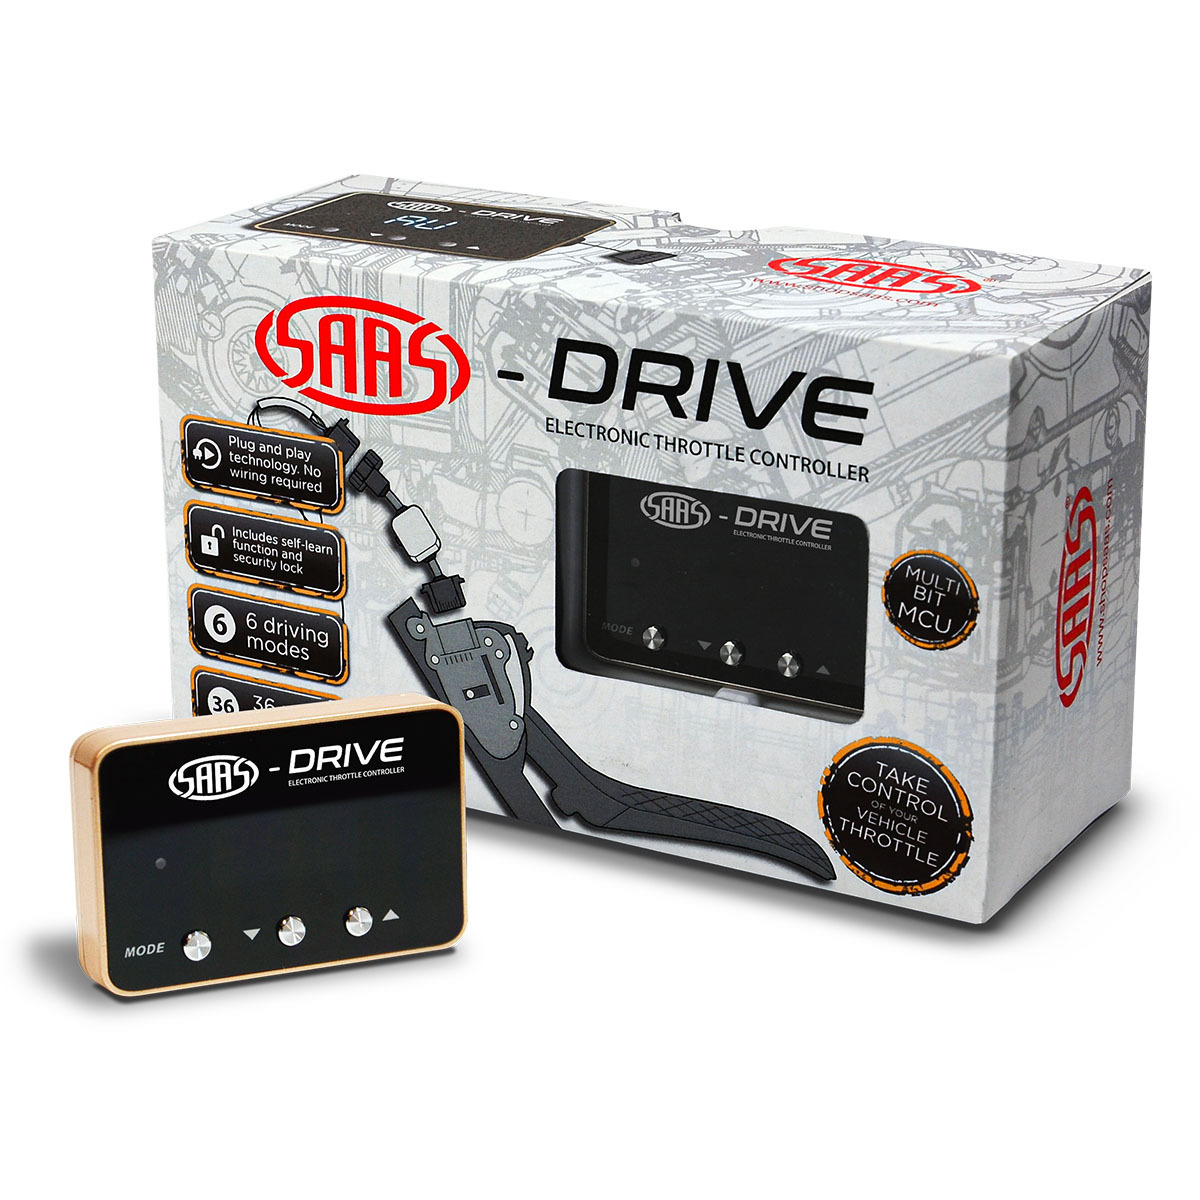 SAAS-Drive Audi R8 1st and 2nd Gen 2006 > Throttle Controller 